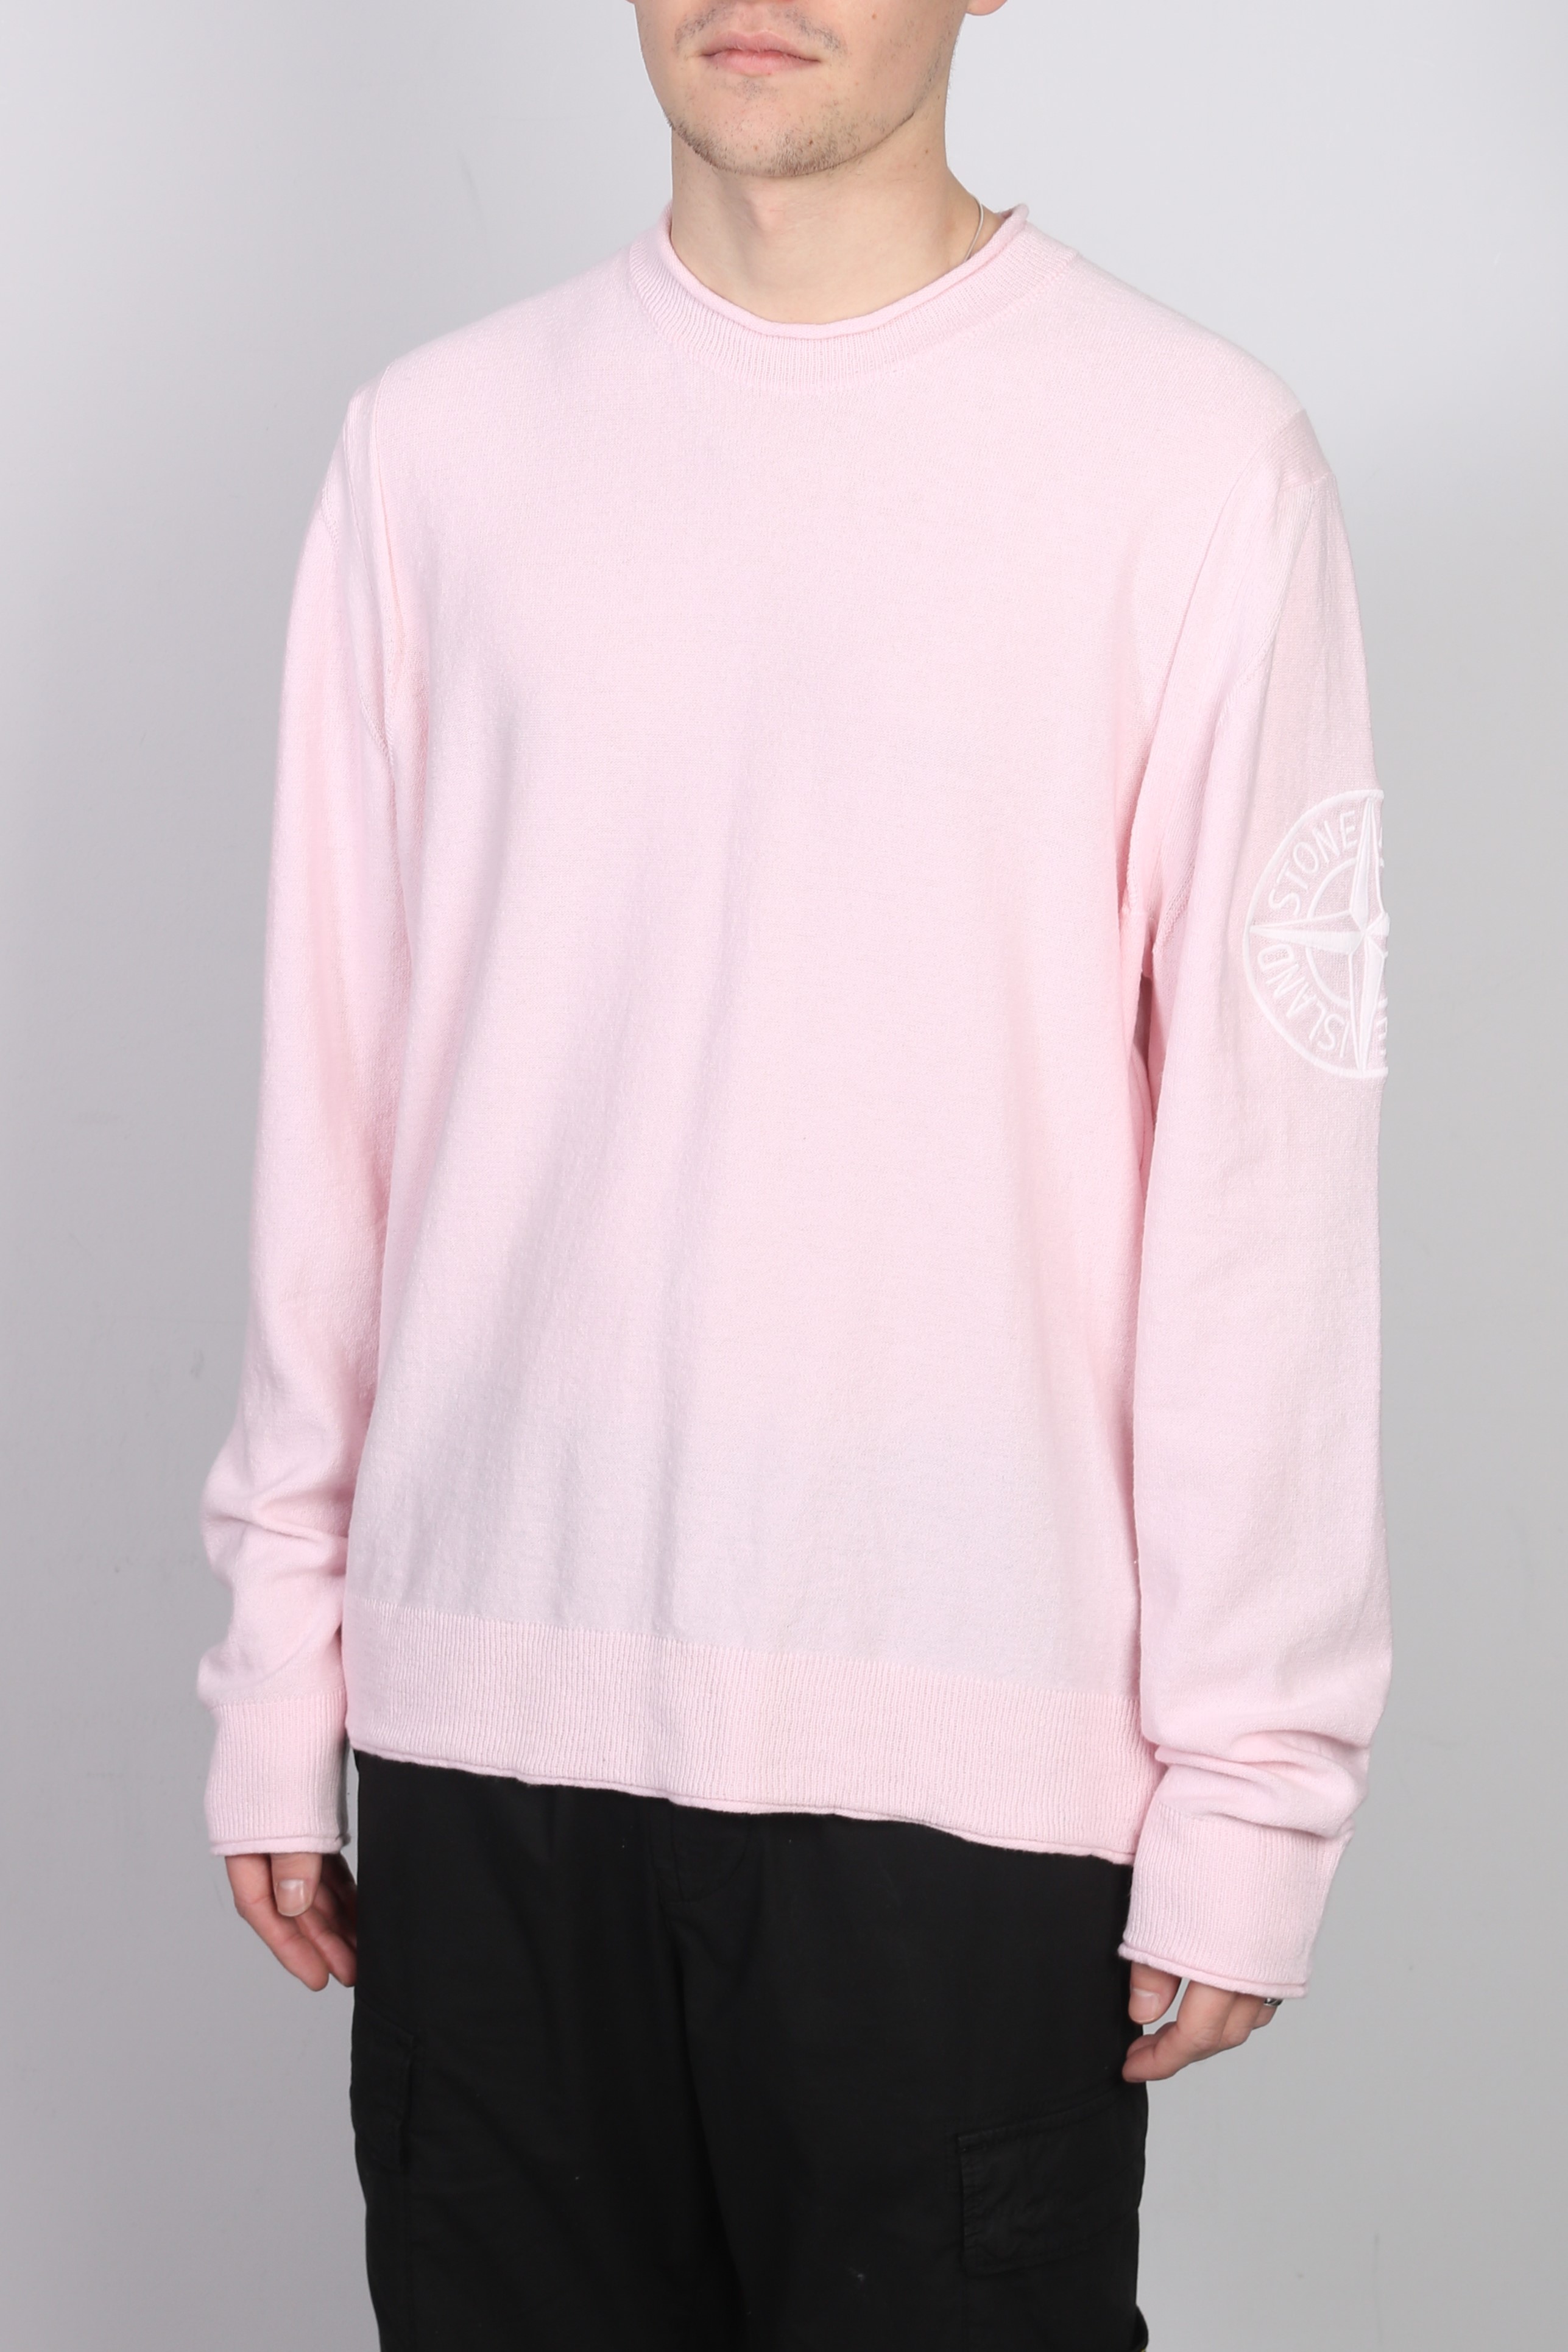 STONE ISLAND Cotton Knit Pullover in Light Pink 2XL